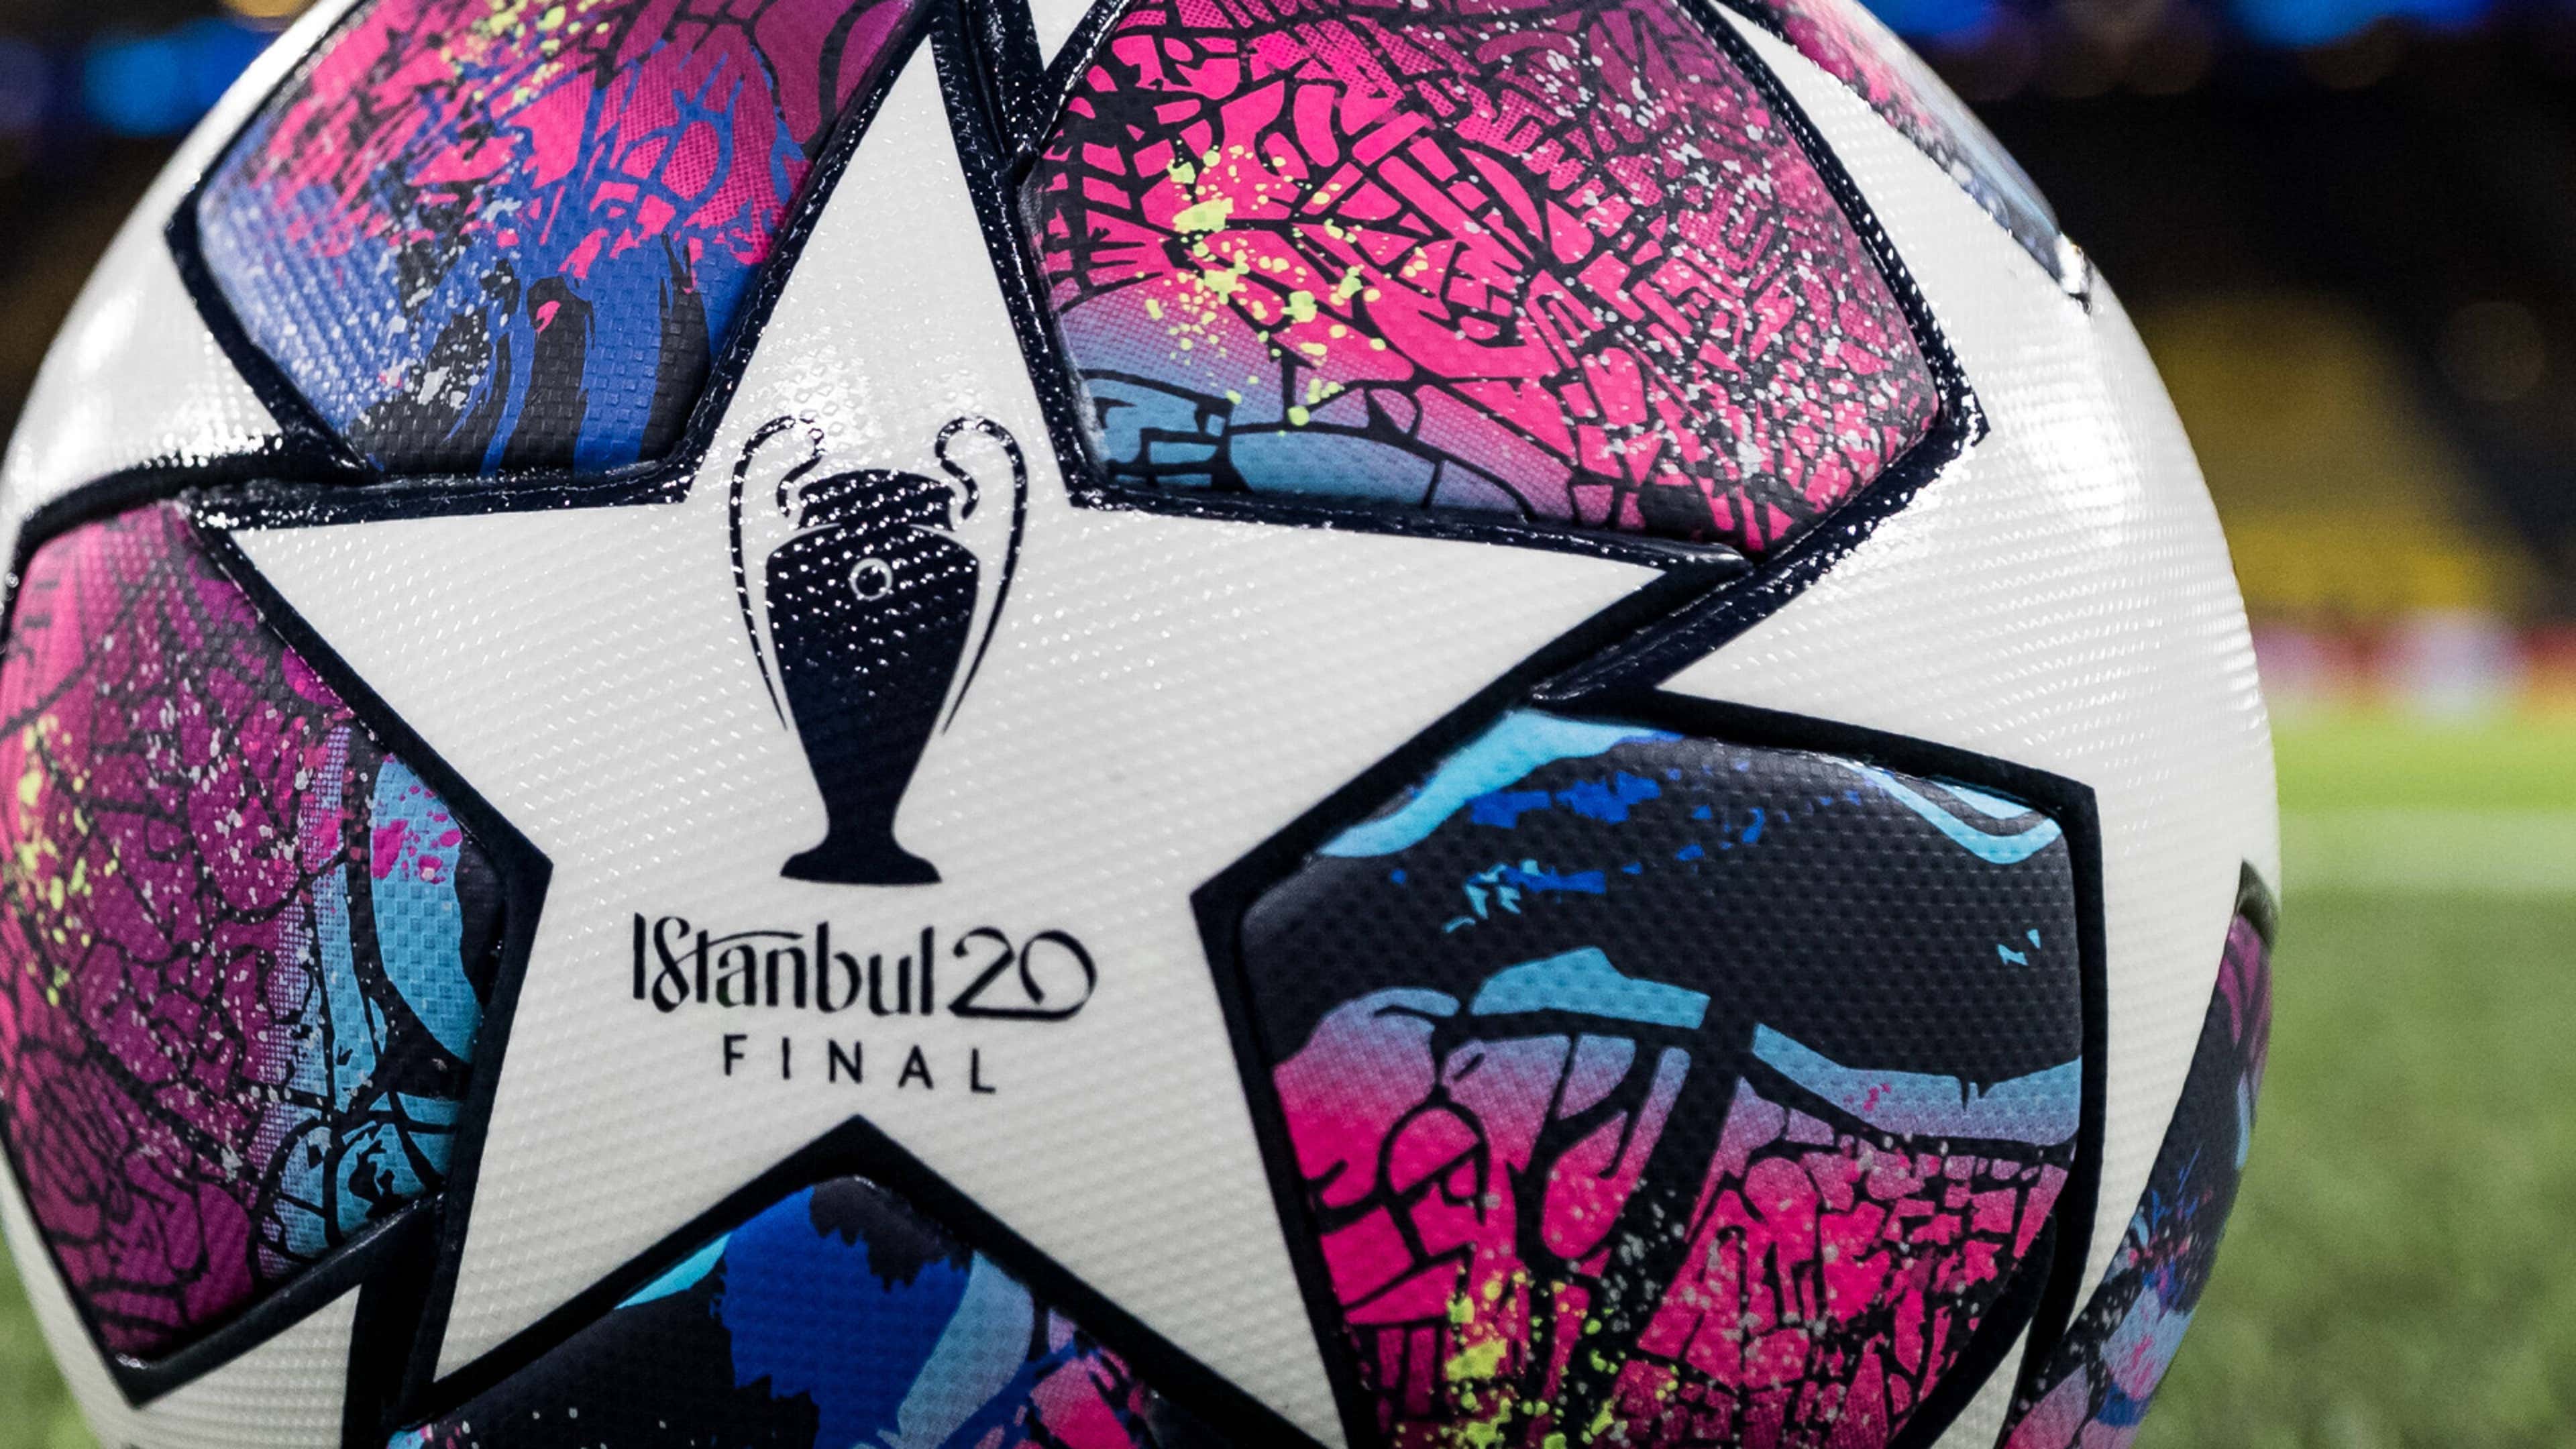 GER ONLY Champions League Ball Final Istanbul 2020